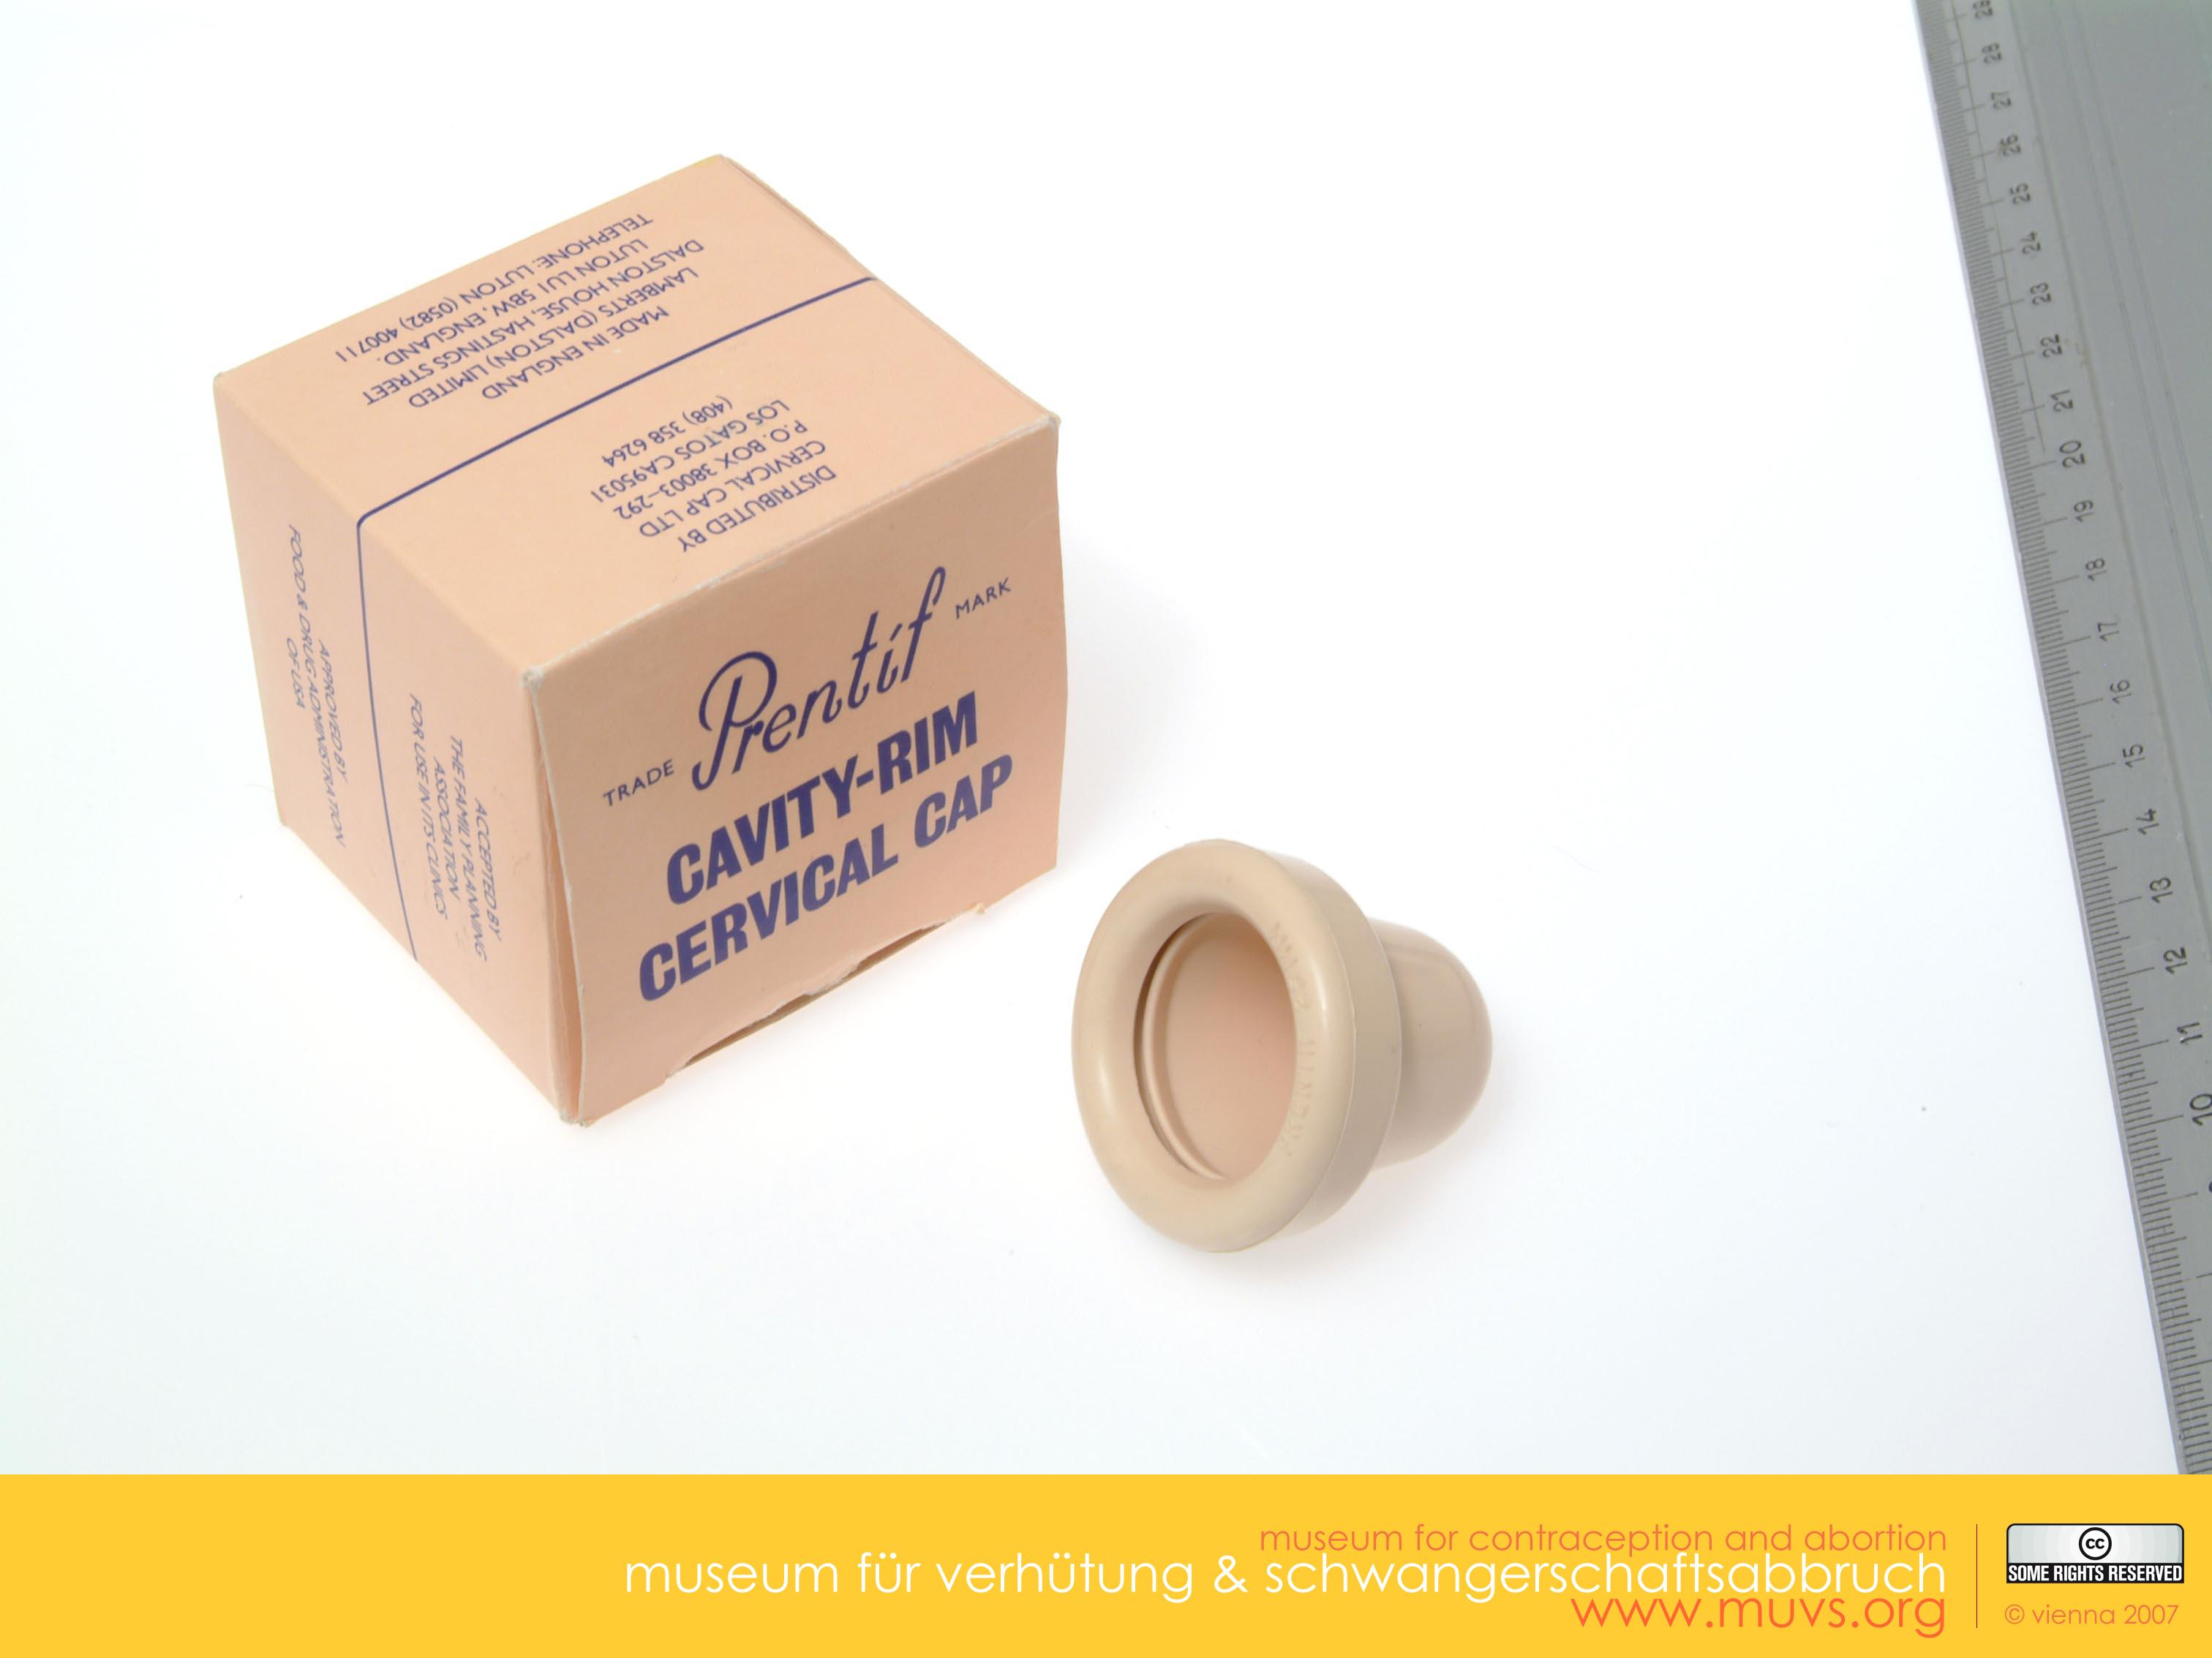 Photograph of the Prentif Cavity Rim Cervical Cap, with packaging. Ruler alongside shows rough size. The cap is beige, teat shaped, hollow, about 3 cm long, rim about the same diameter. Box is beige, square, with branding, blue writing. The Prentif Cavity Rim Cervical Cap was one of the cap types that the FDA approved in 1988 for American women’s use. Courtesy of the Museum of Contraception and Abortion, Vienna, Austria (MUVS, Wien).